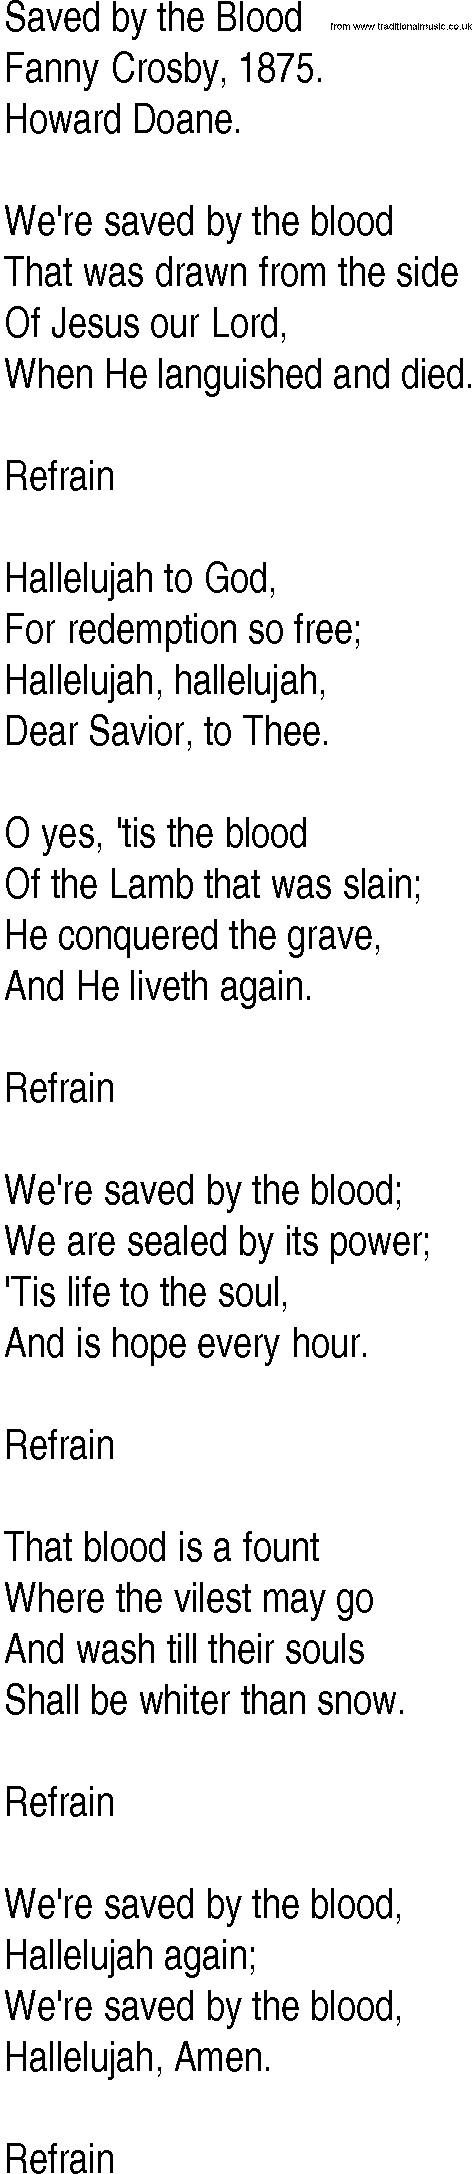 Hymn and Gospel Song: Saved by the Blood by Fanny Crosby lyrics